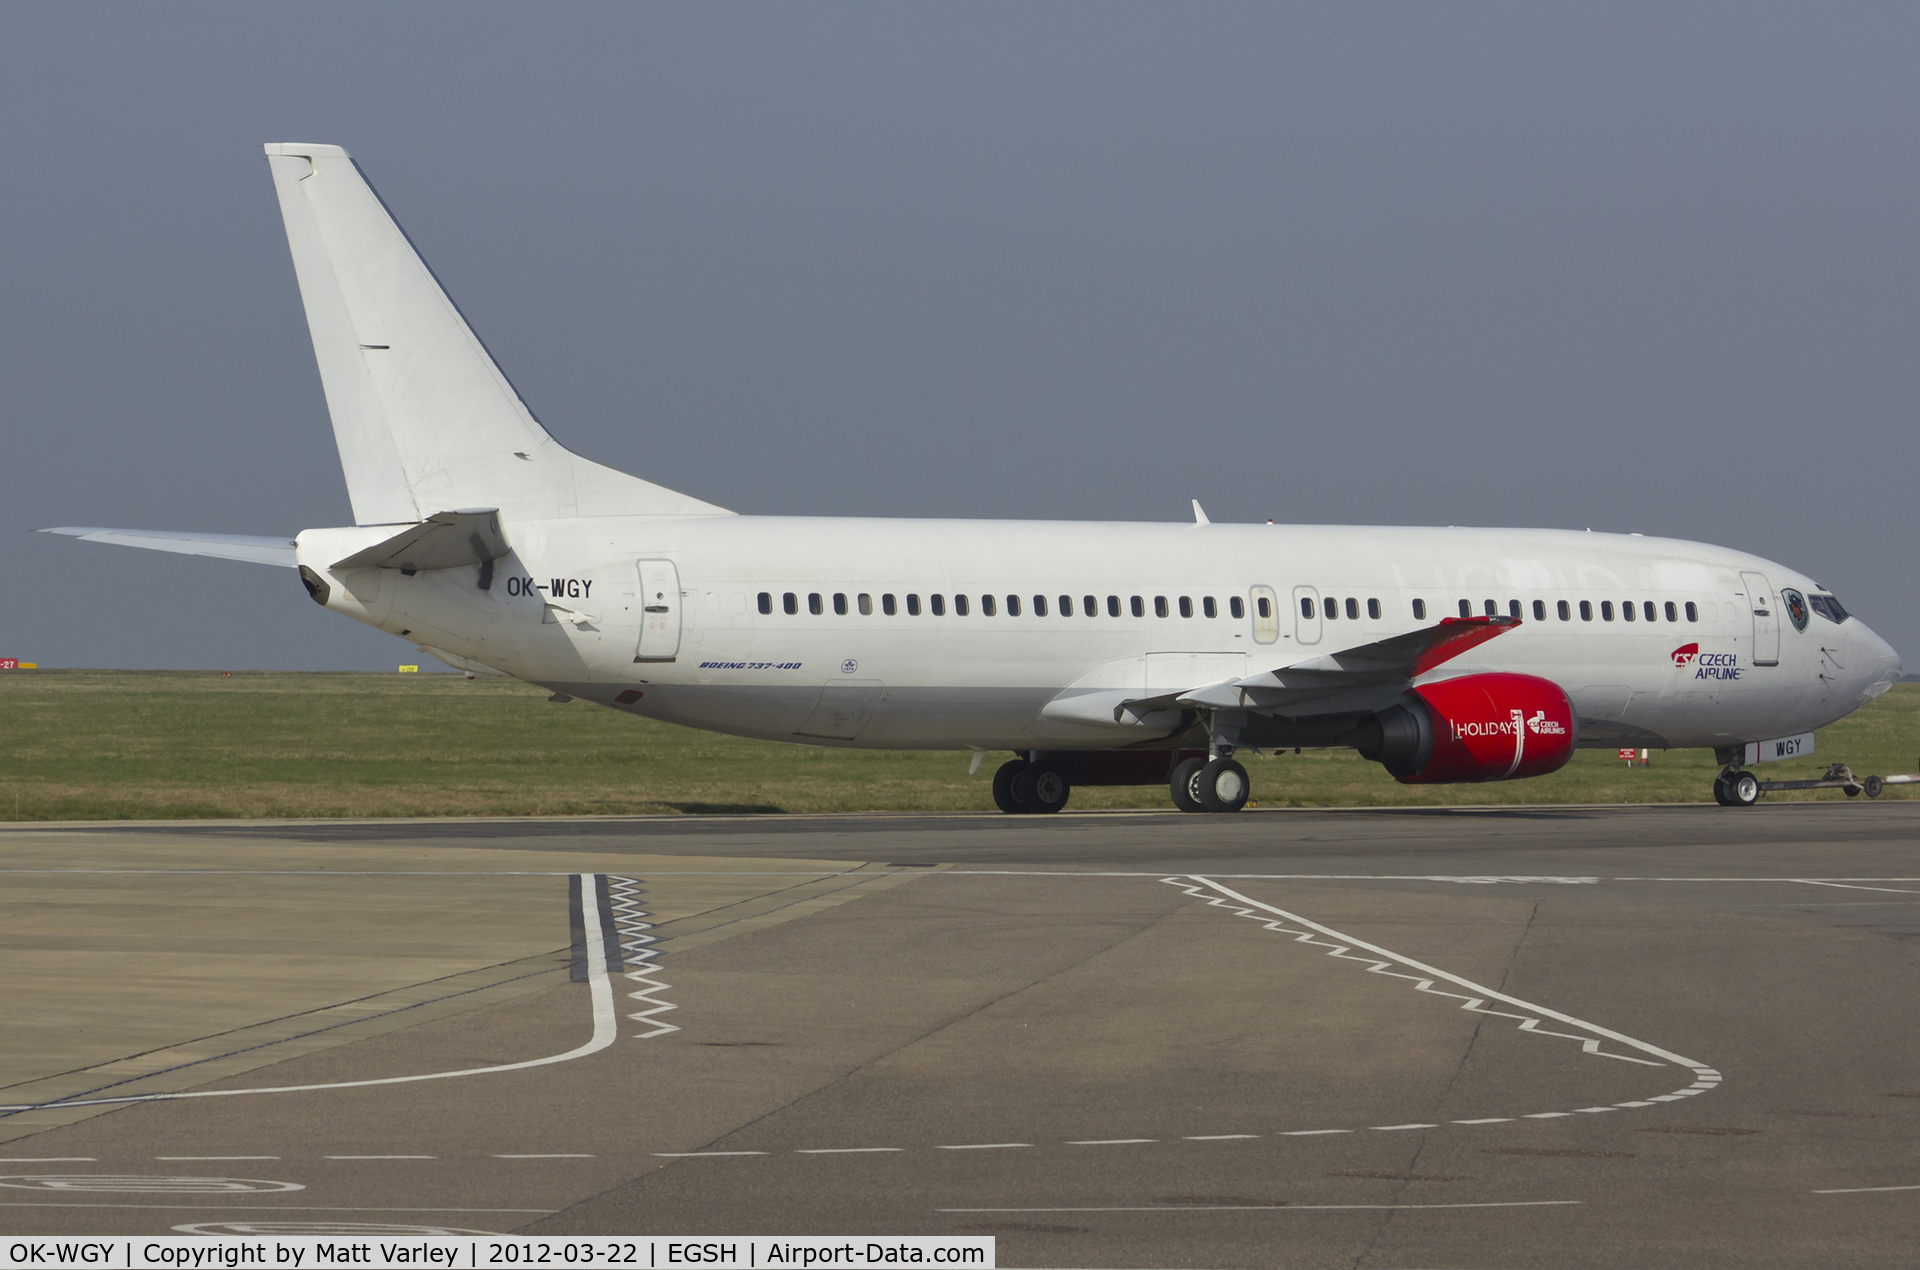 OK-WGY, 1991 Boeing 737-436 C/N 25839, Being towed to the Air Livery hangar for spray.